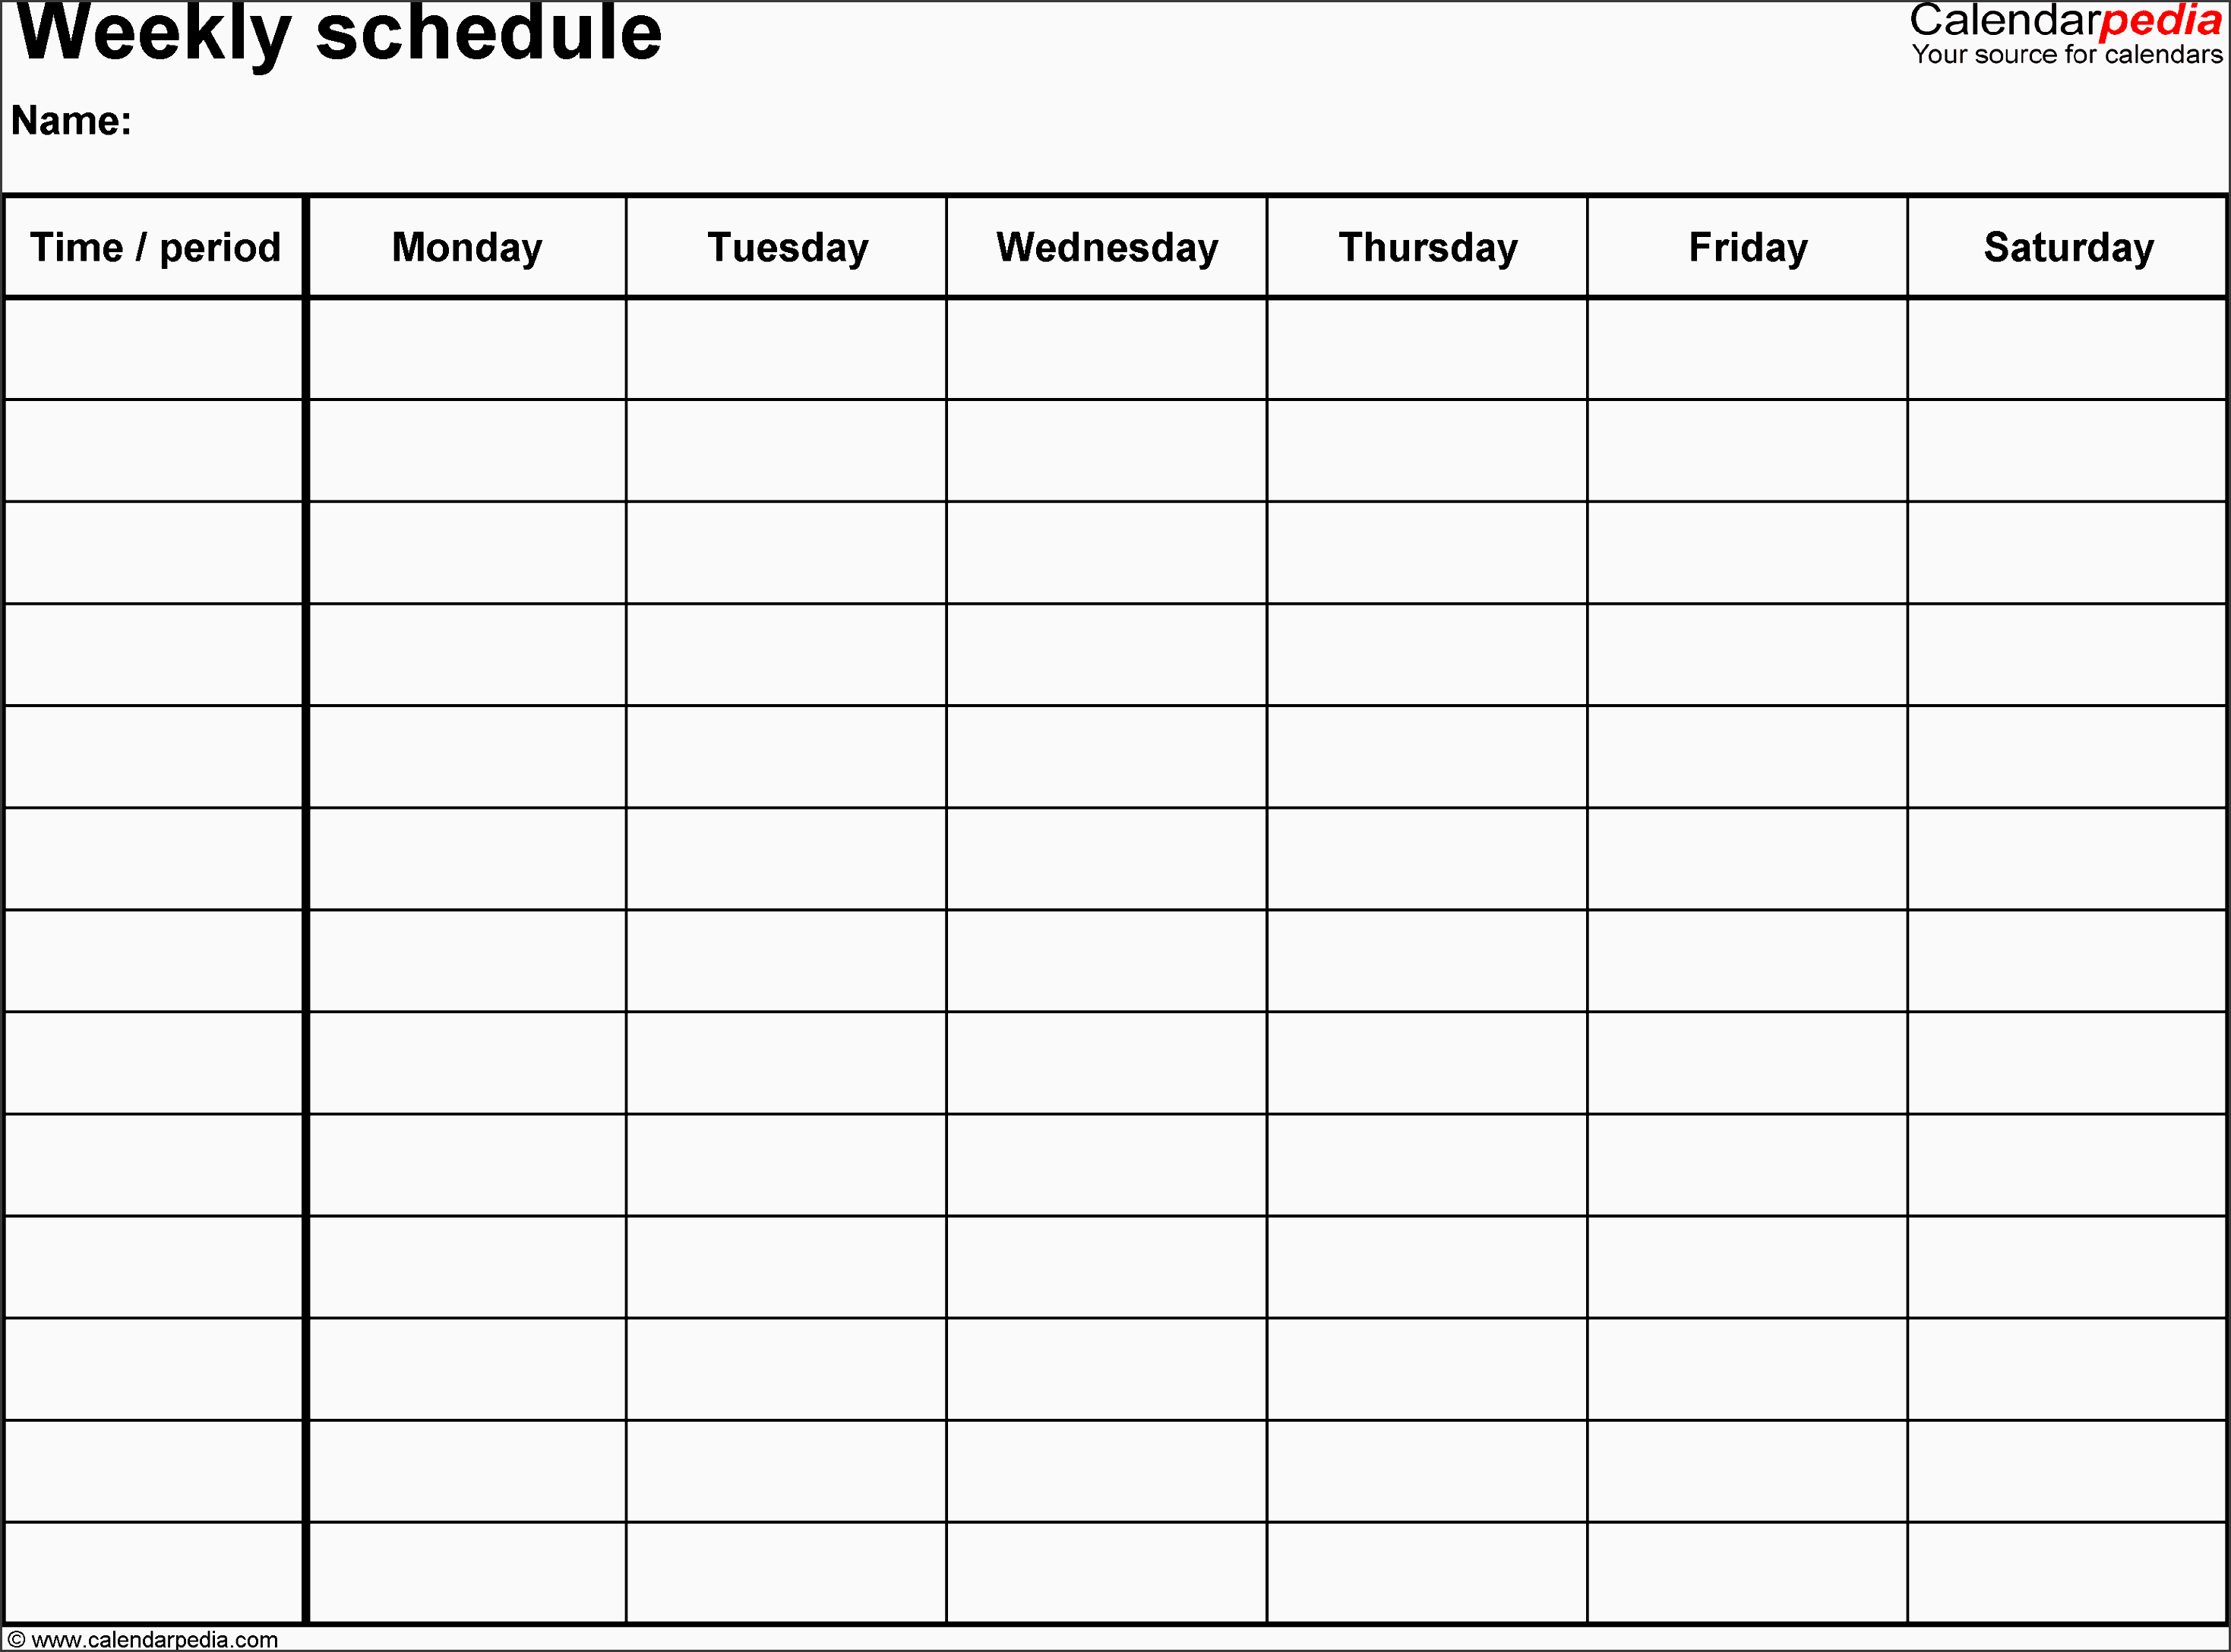 weekly schedule template for excel version 8 landscape 1 page monday to saturday